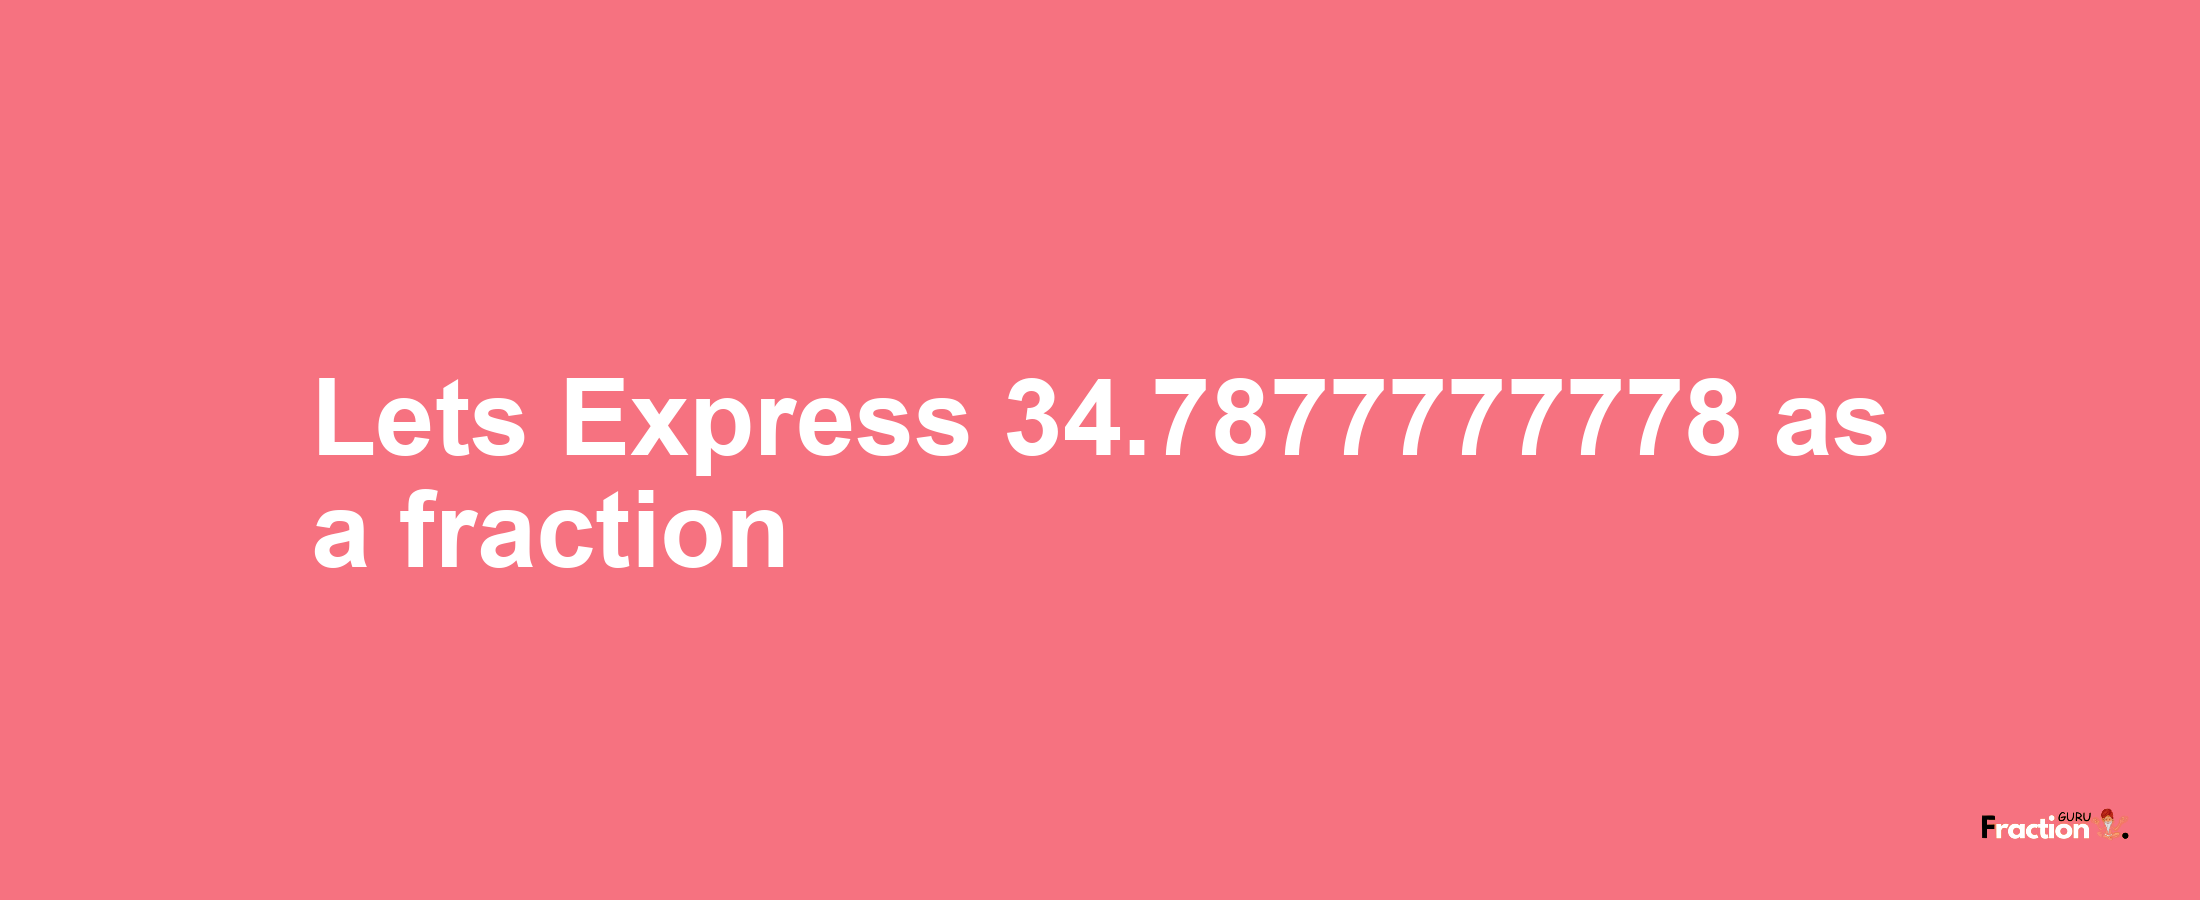 Lets Express 34.7877777778 as afraction